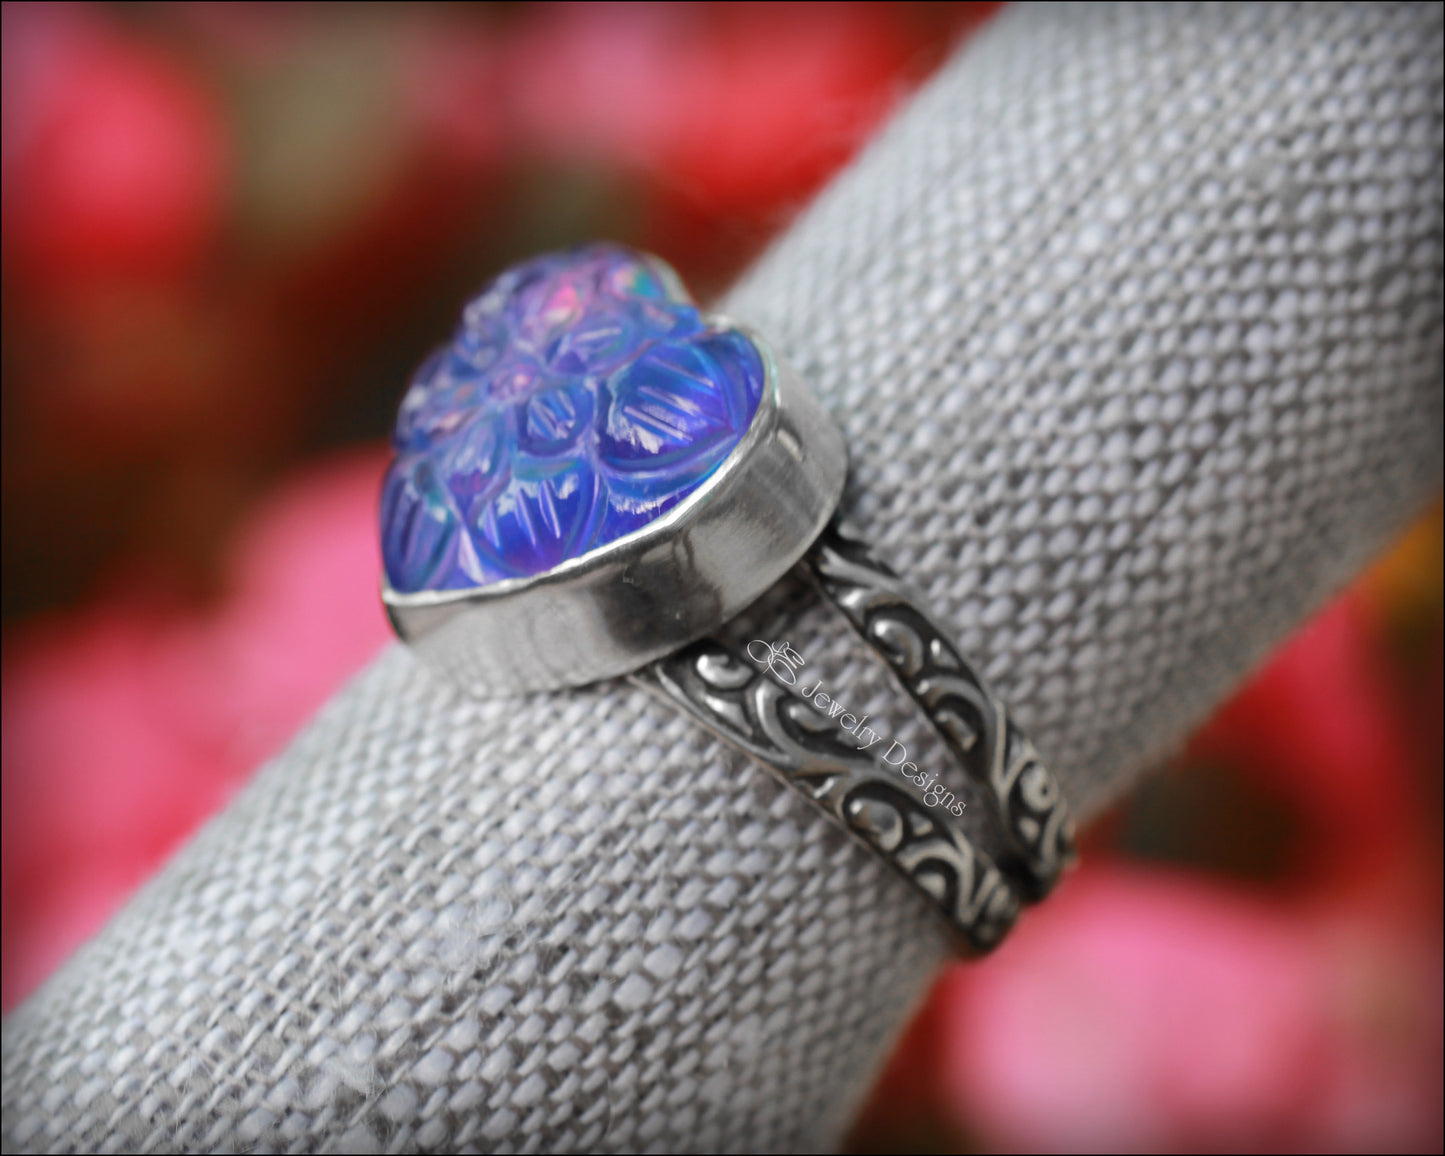 Sterling Carved Aurora Opal Heart Ring - LE Jewelry Designs